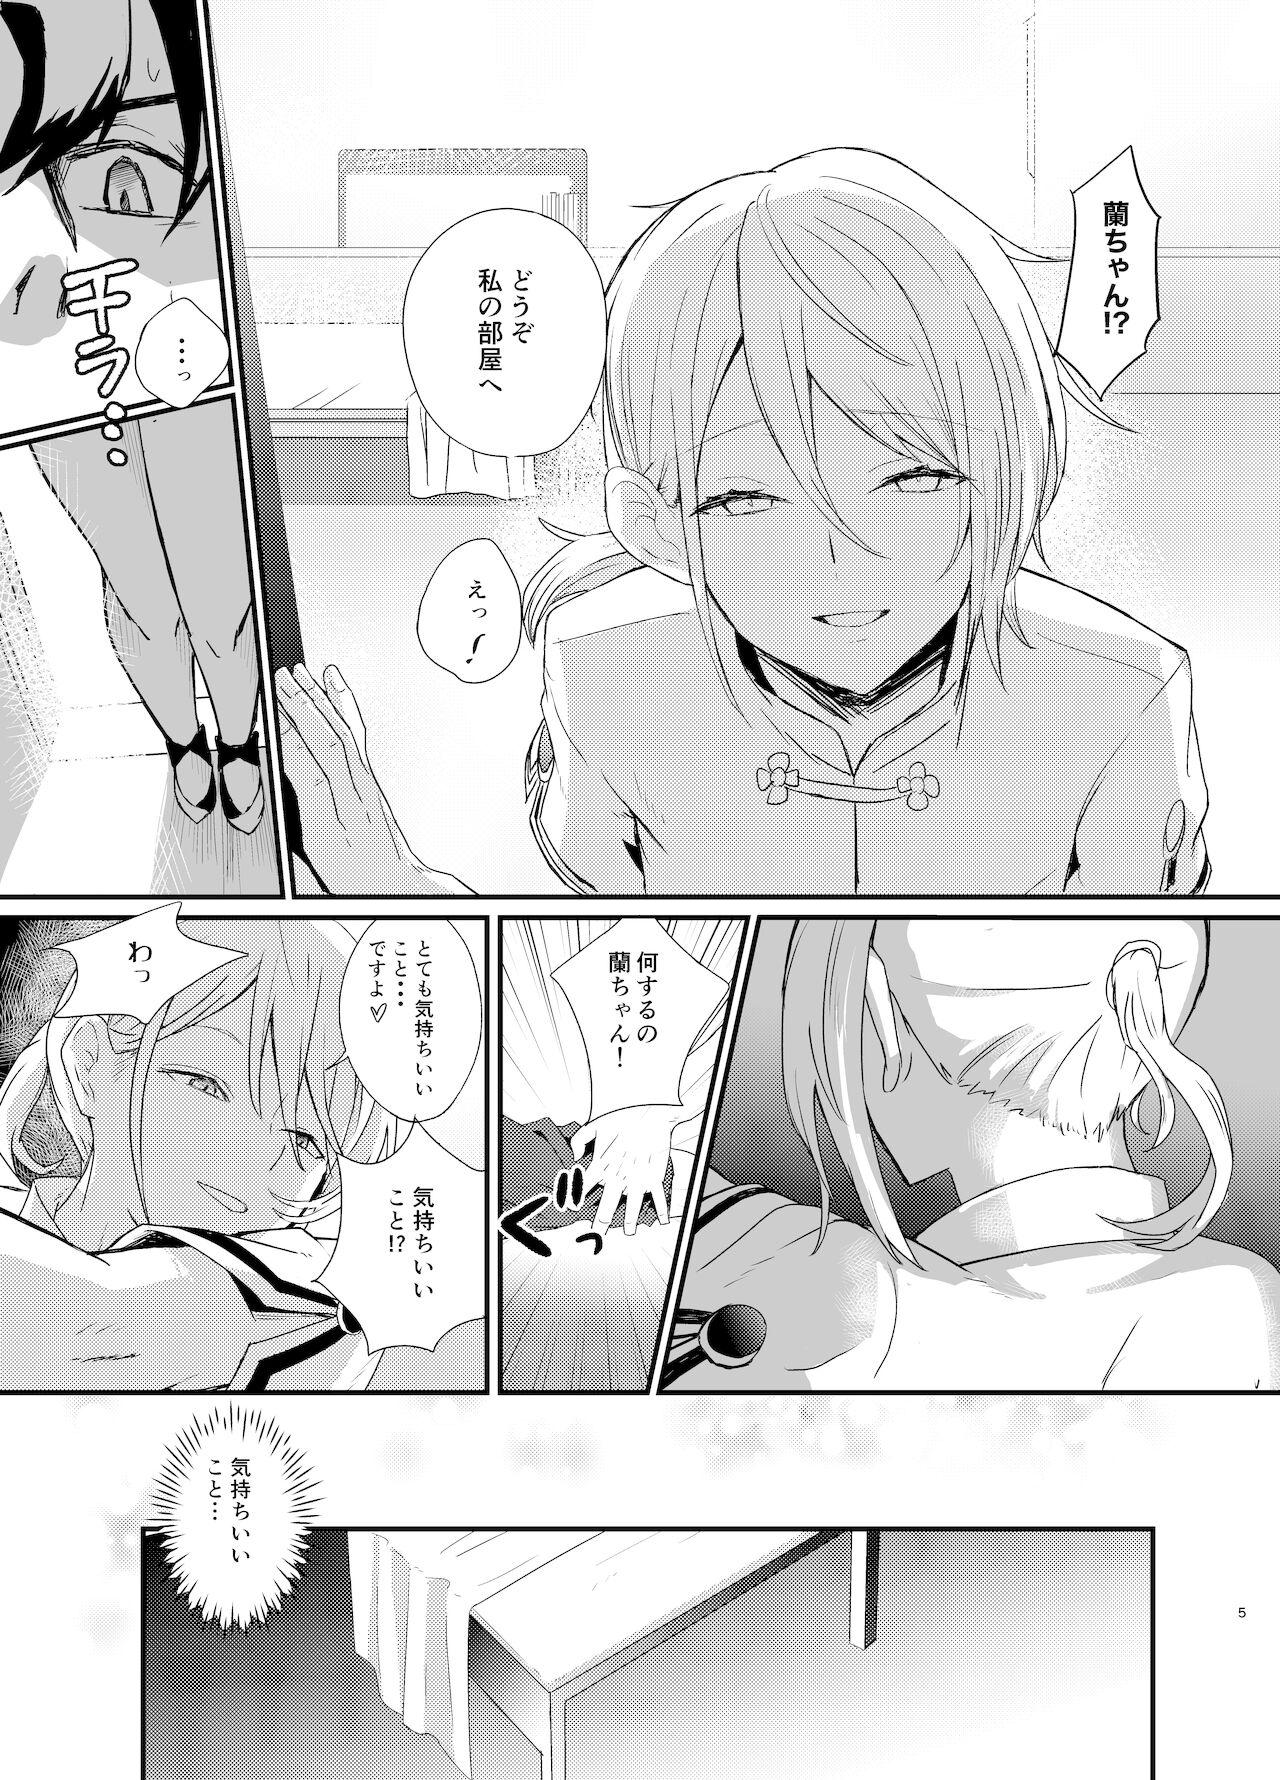 Old Man 蘭陵王NTRゆうわく作戦! - Fate grand order Gapes Gaping Asshole - Page 6